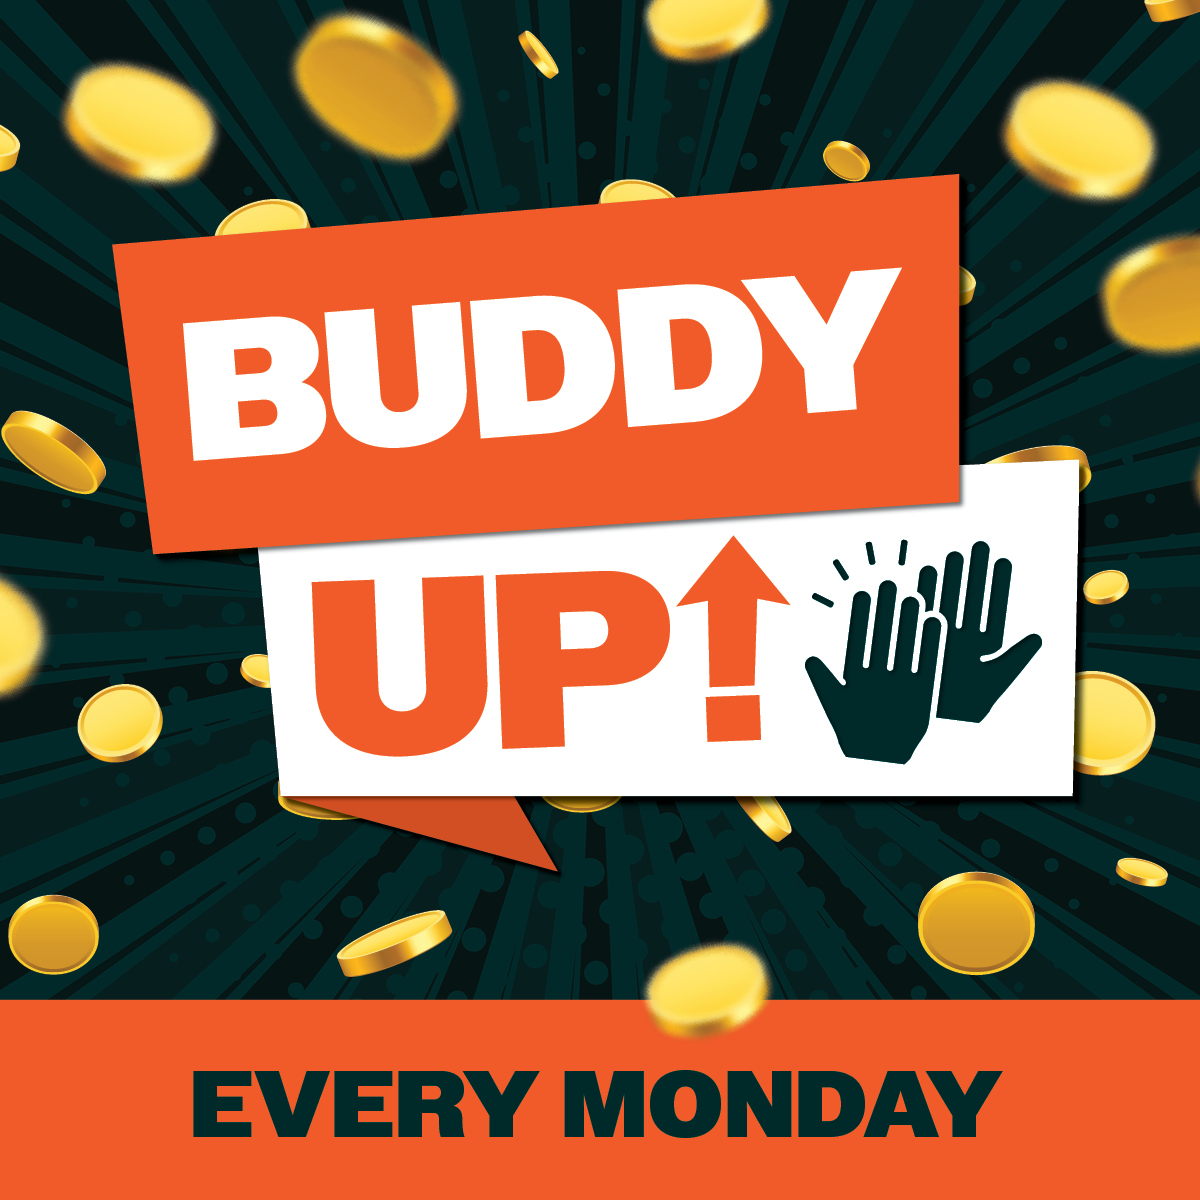 It's time to Buddy Up! 🤝🔥 Refer up to 6 friends every Monday and you can both earn Reward Play. See details: bit.ly/3x61XUM